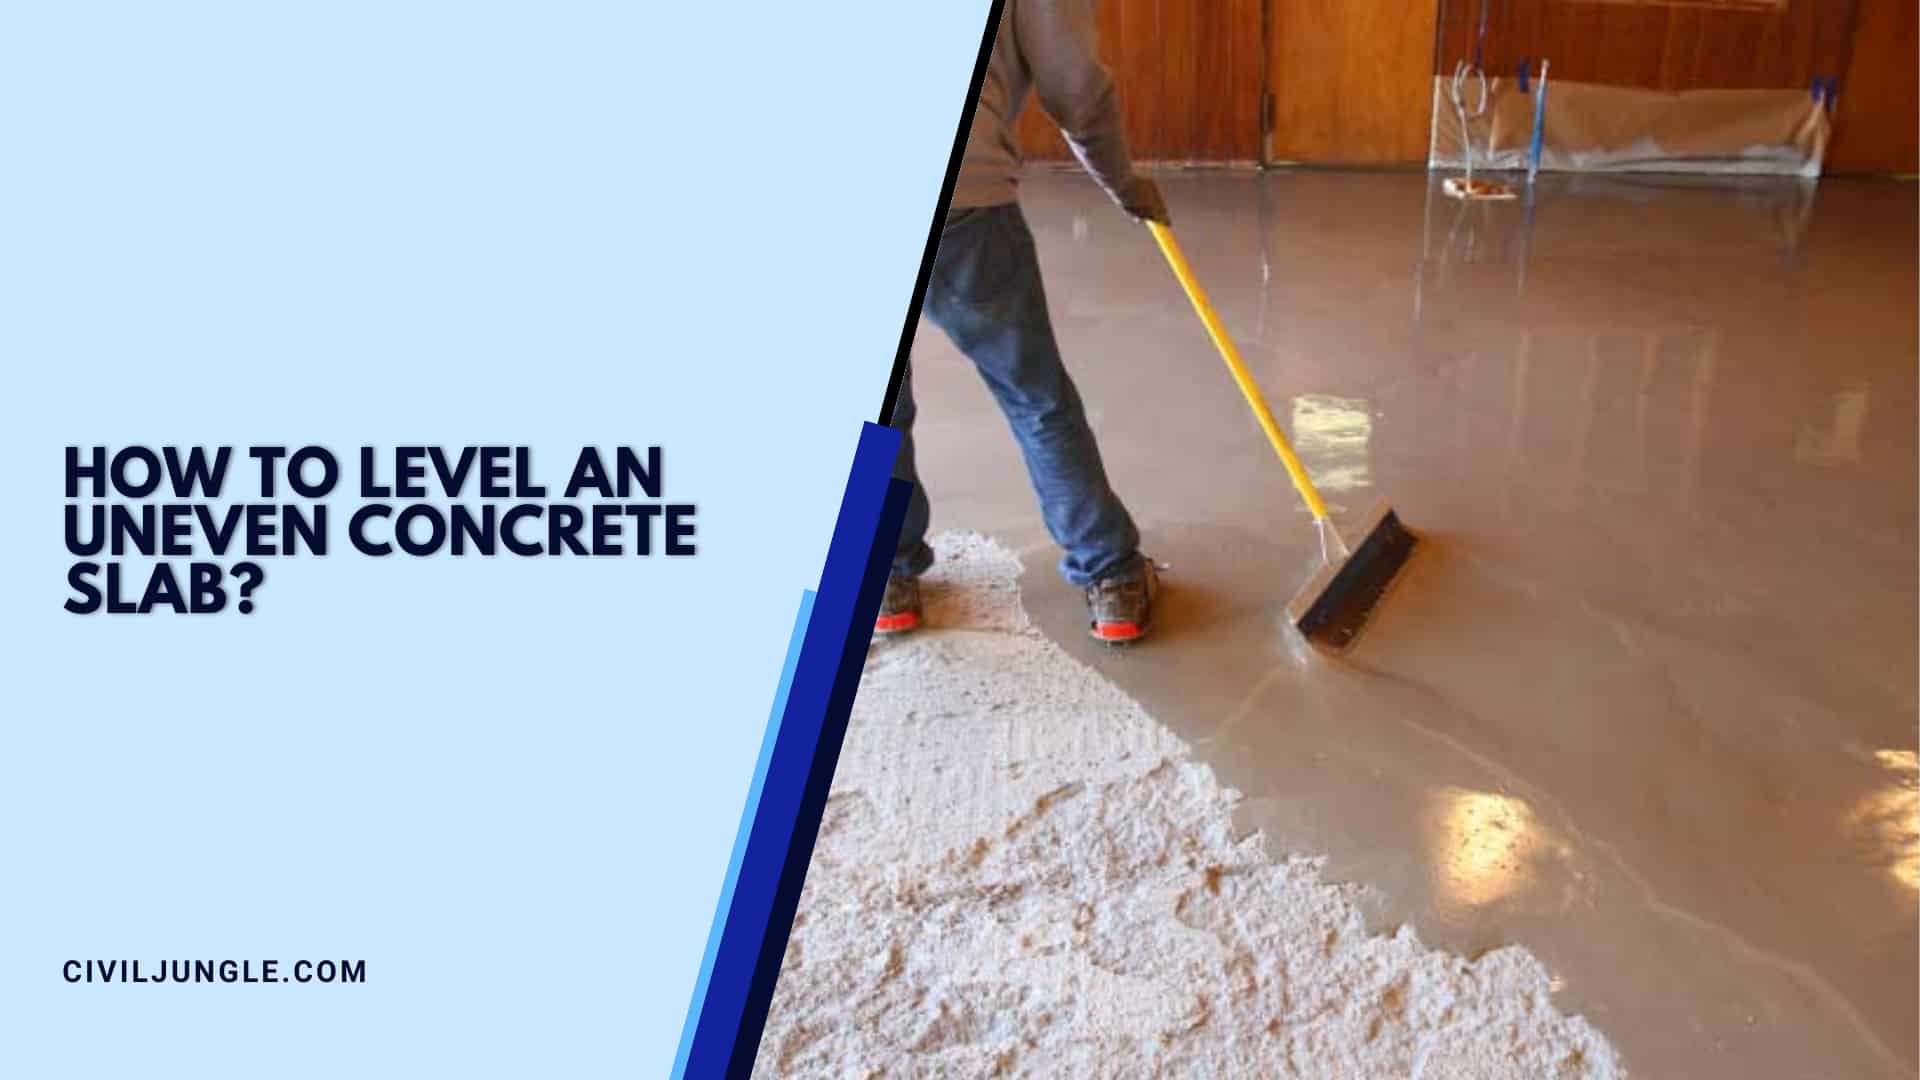 How To Level An Uneven Concrete Slab?